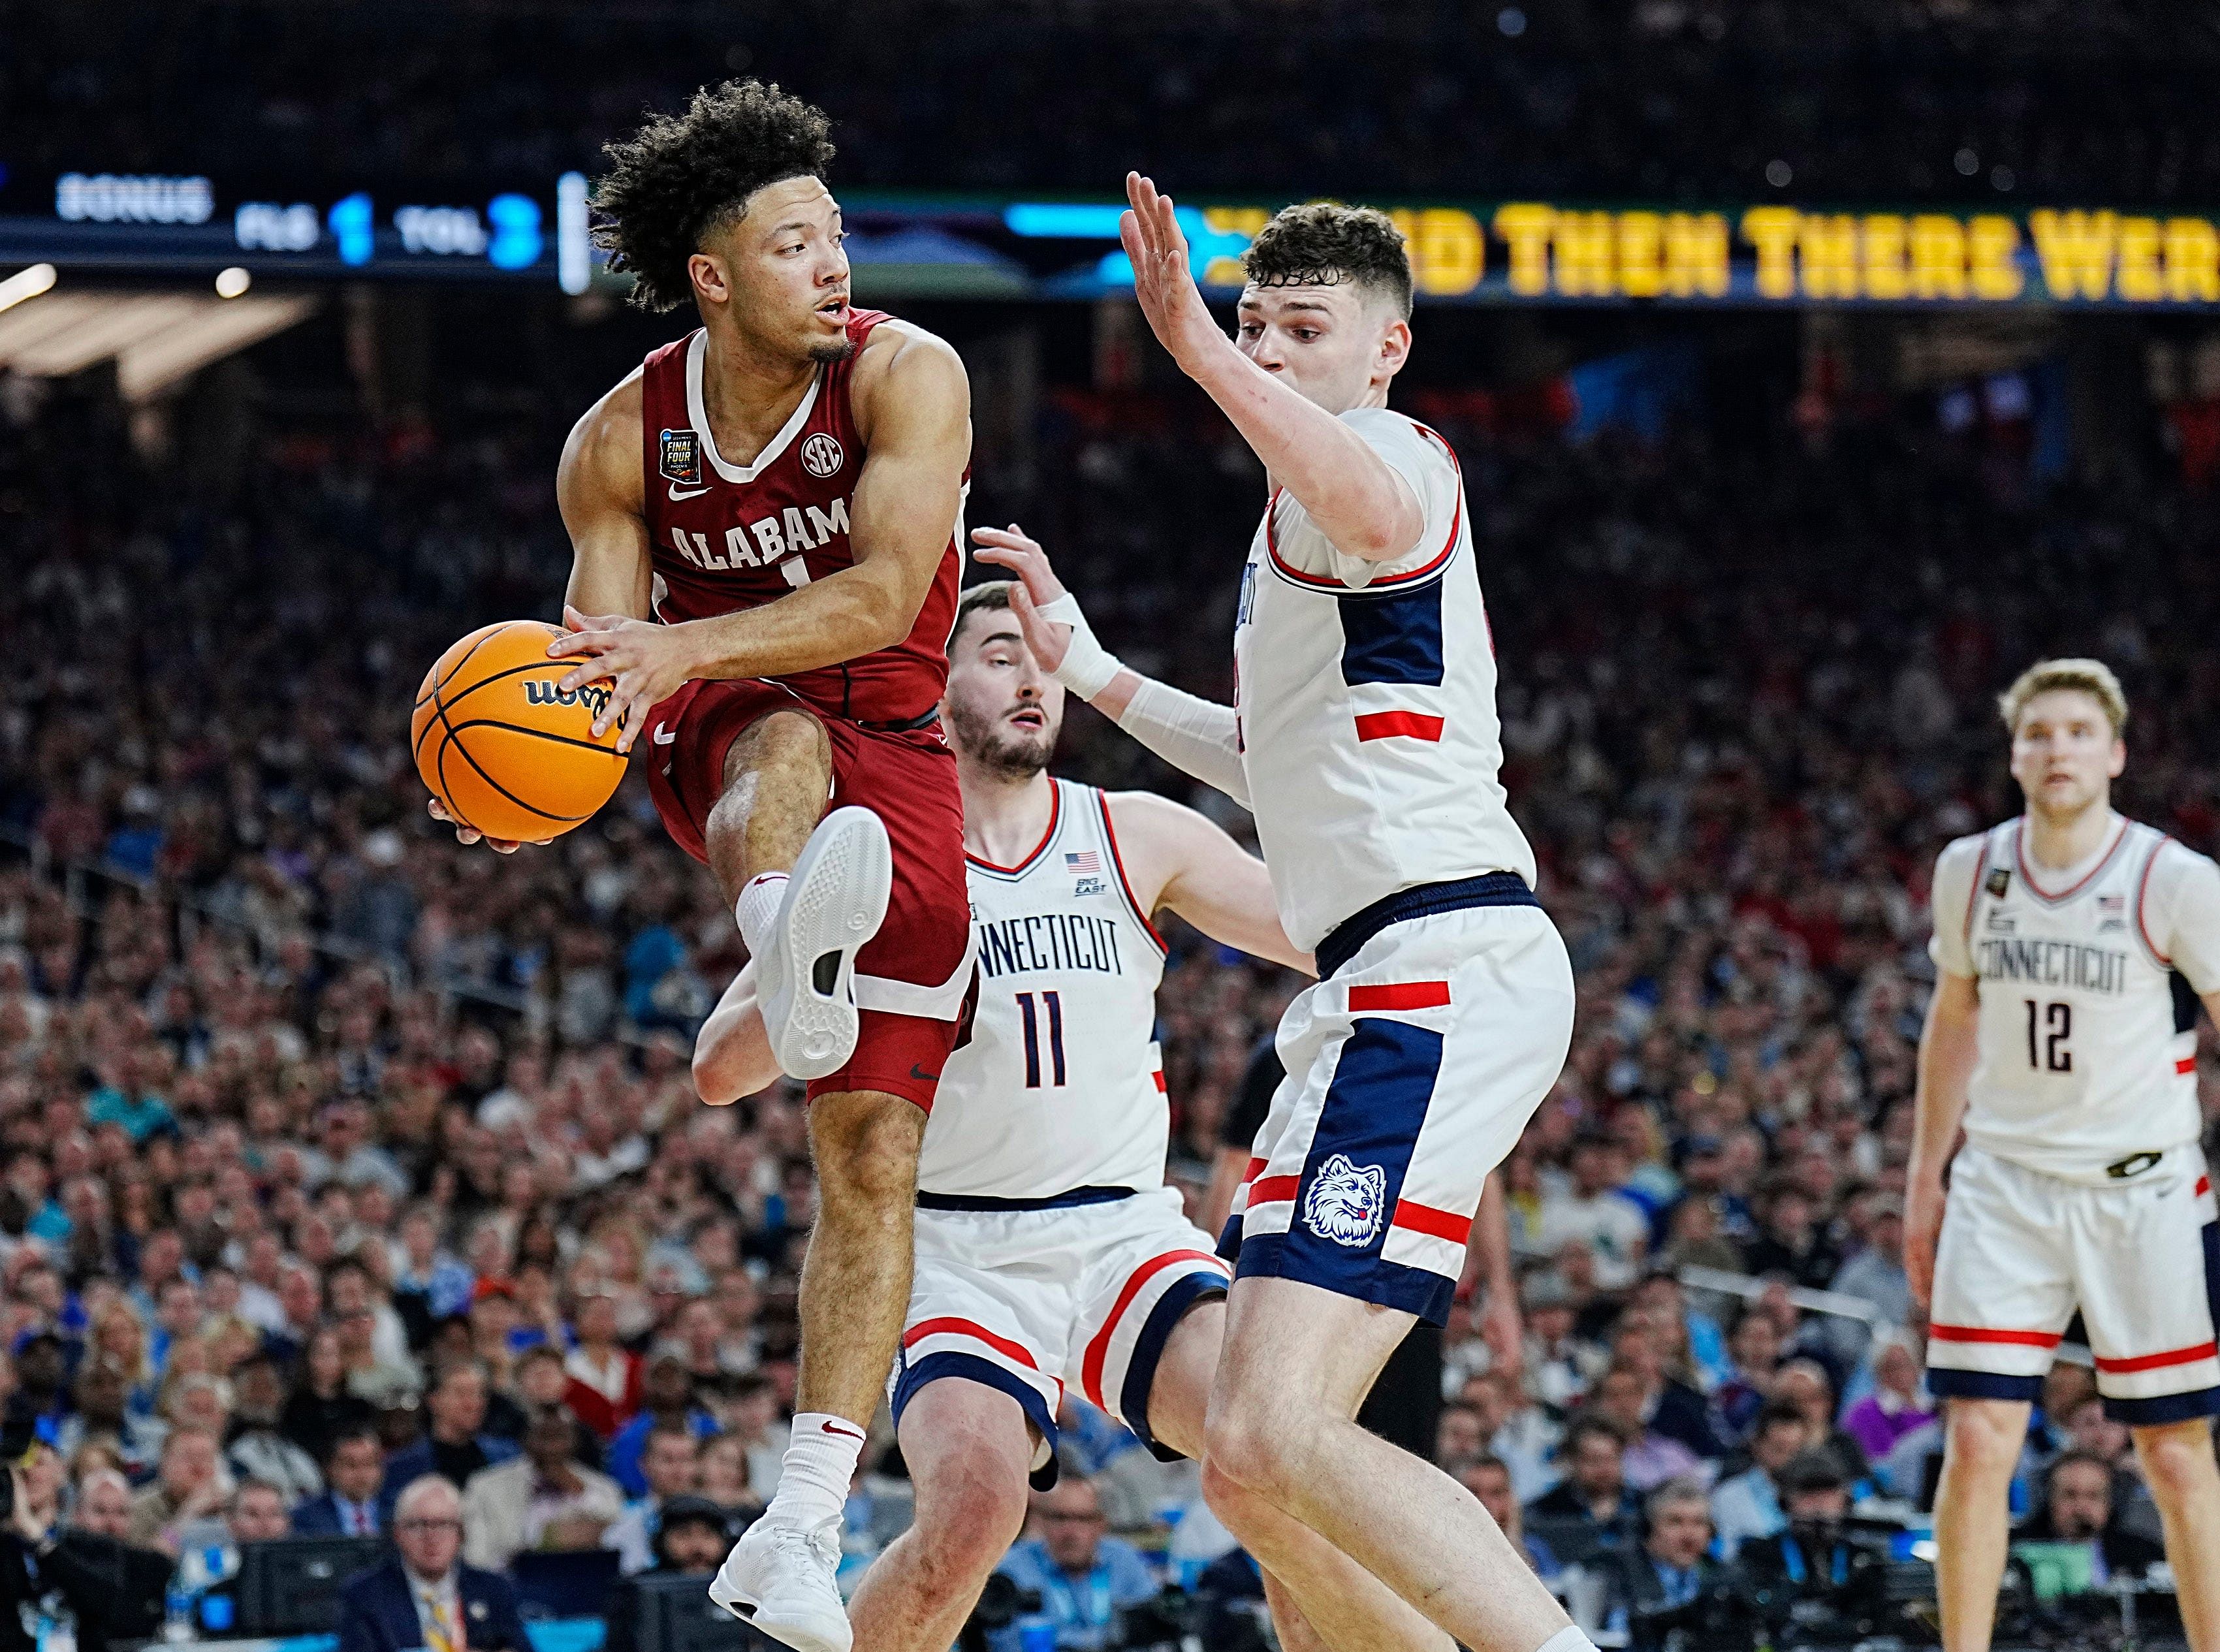 Alabama star Mark Sears may have played his way into the first round of the NBA Draft last season.